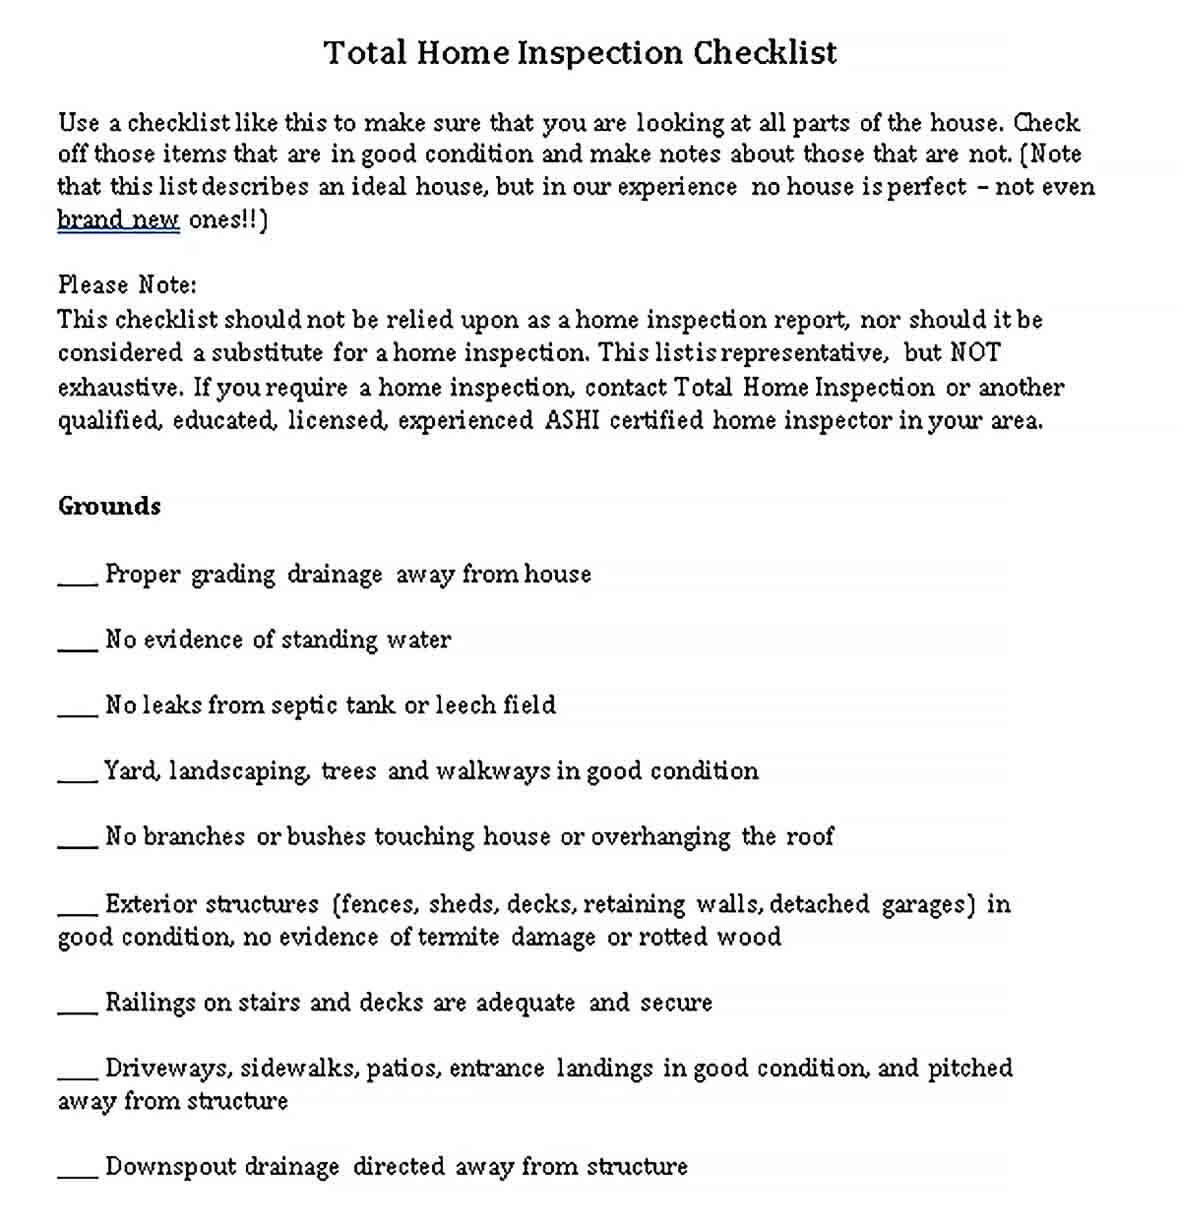 Sample Total Home Inspection Checklist